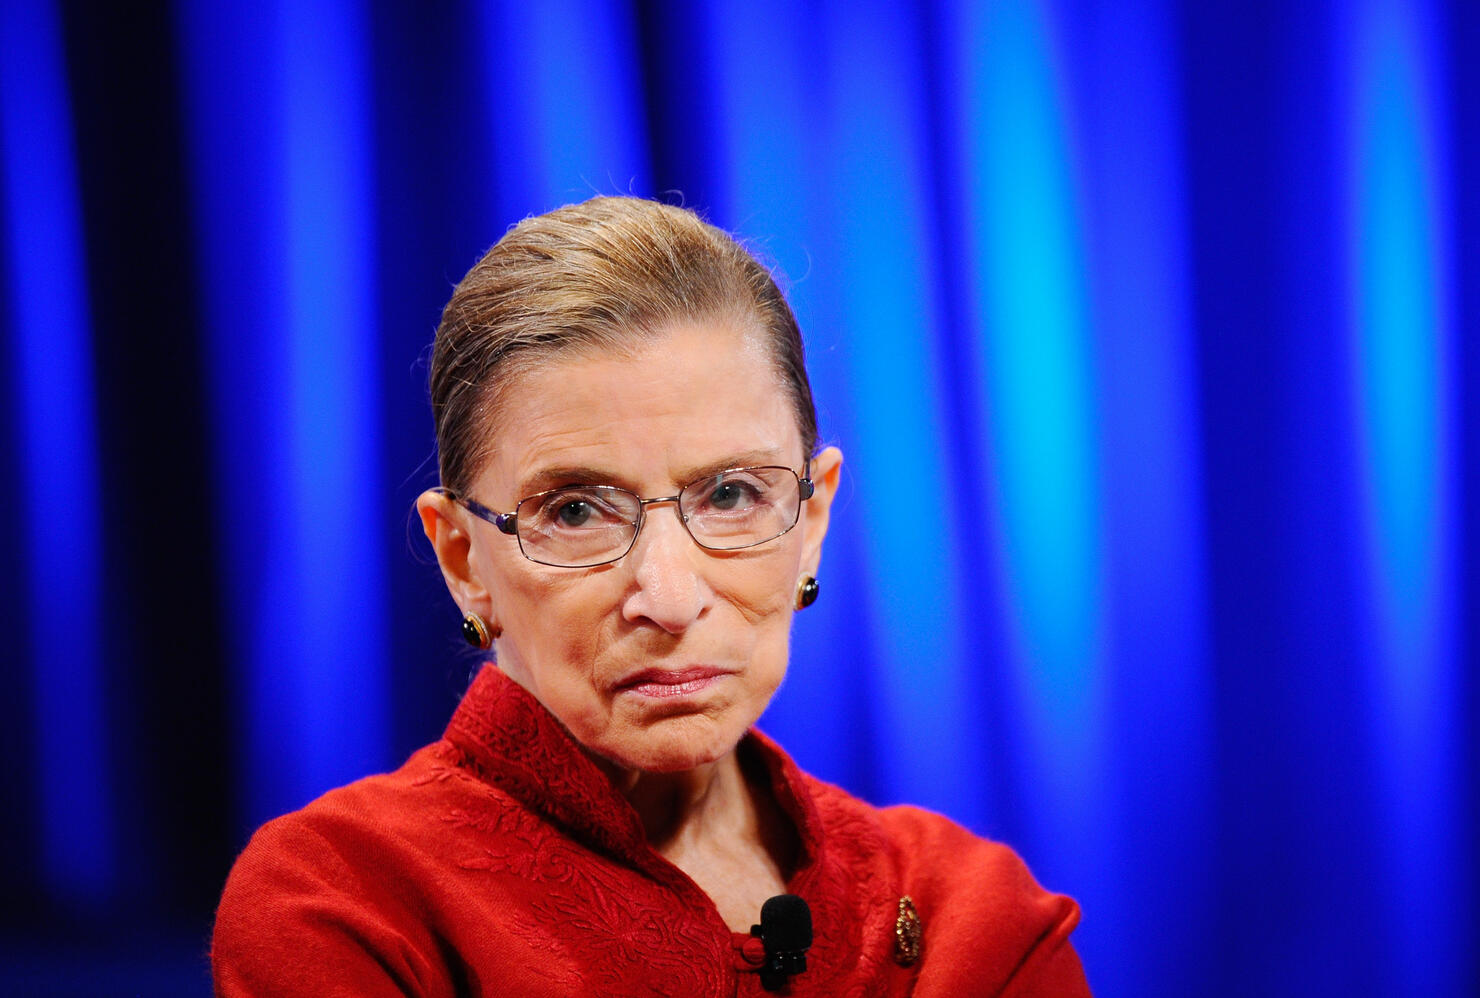 Supreme Court: Justice Ginsburg has cancerous growths removed from lung